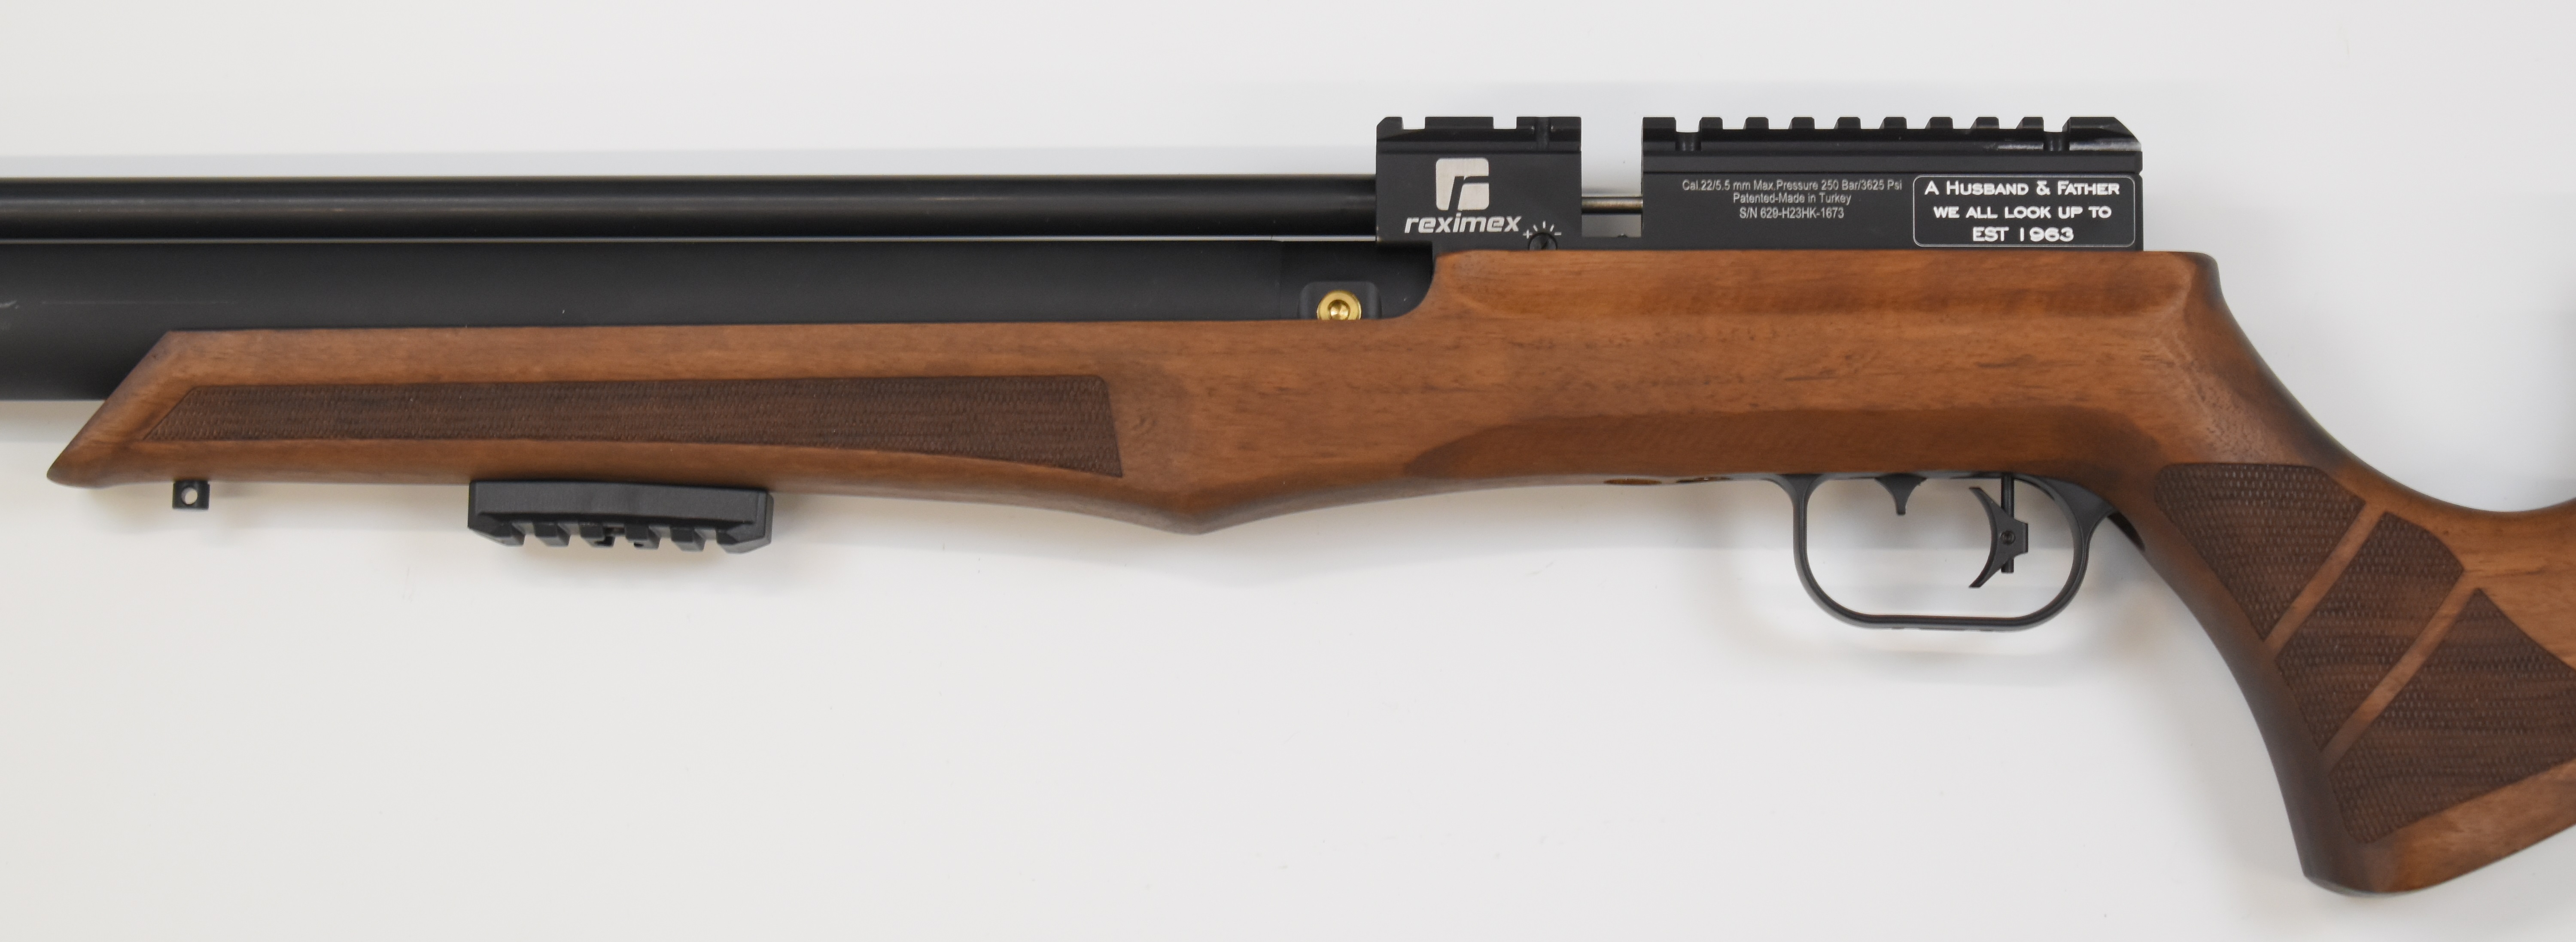 Reximex LYRA .22 PCP air rifle with chequered semi-pistol grip, adjustable trigger, 12-shot magazine - Image 9 of 12